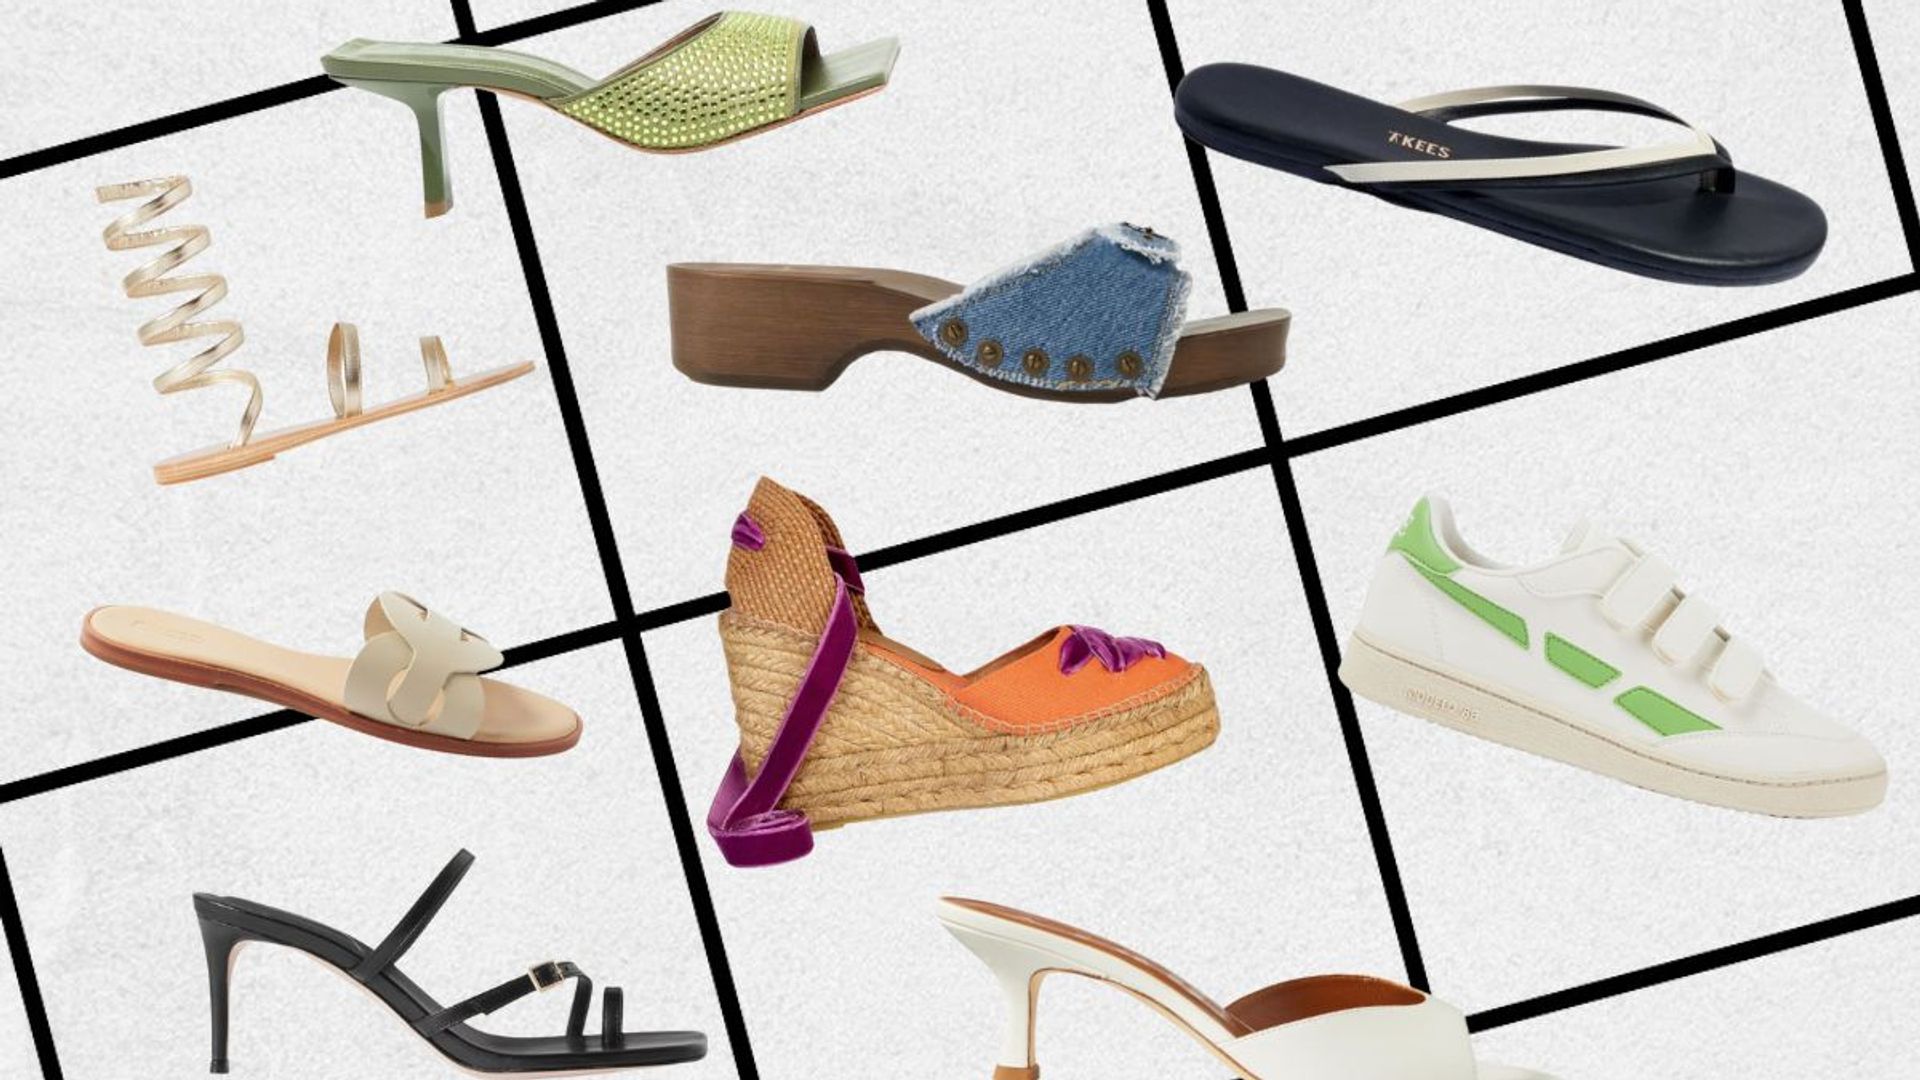 The 20 best places to buy sandals online - Reviewed